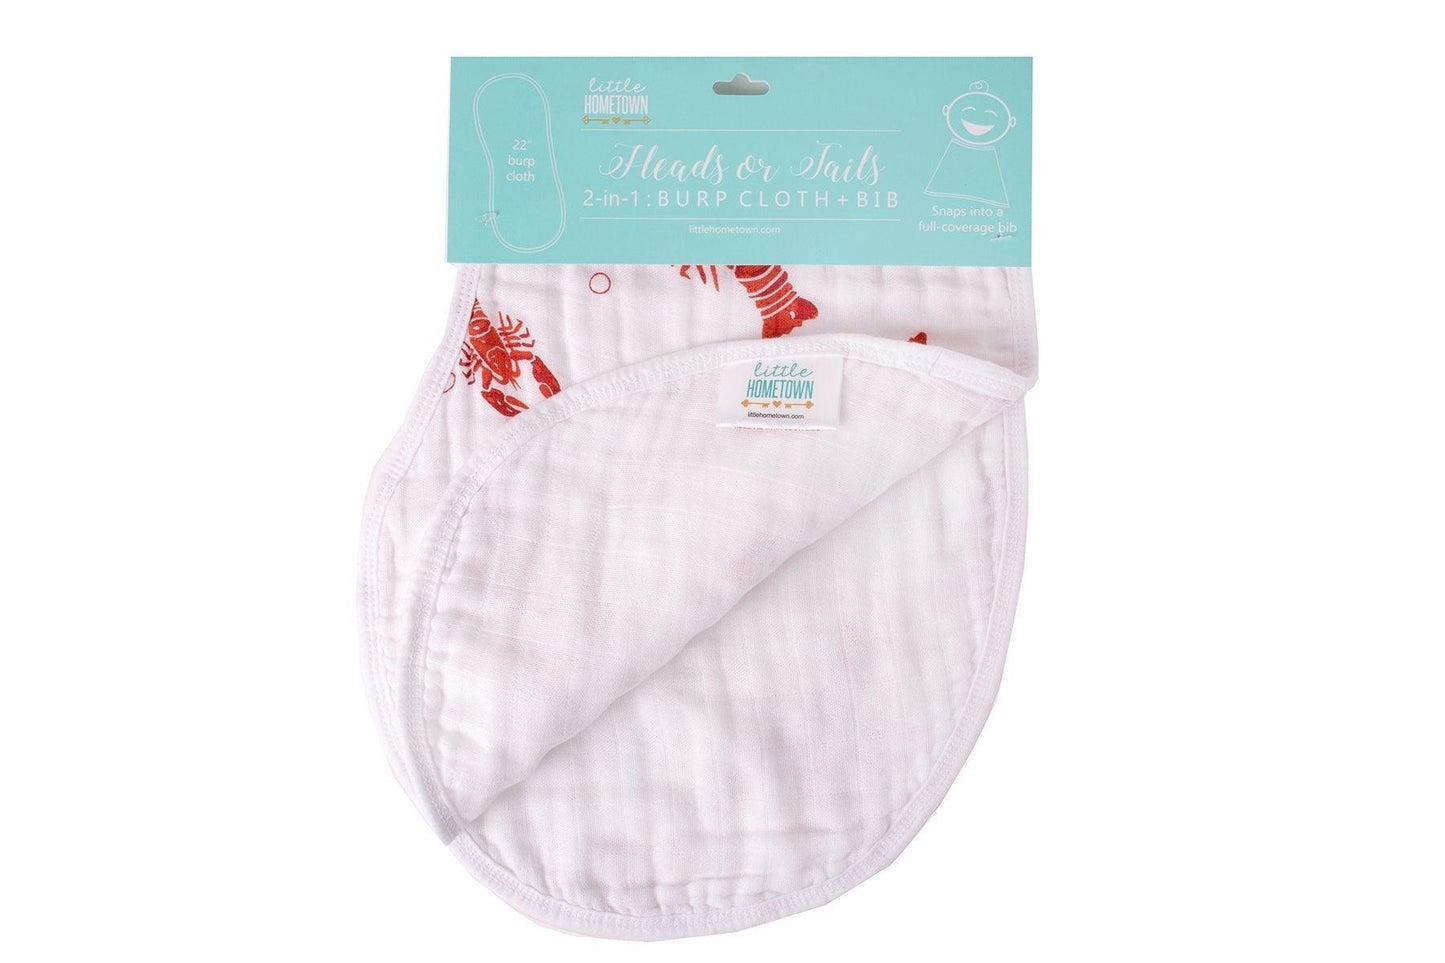 Baby bib and burp cloth set with red crawfish and lobster print, labeled "Heads Tails" on a white background.